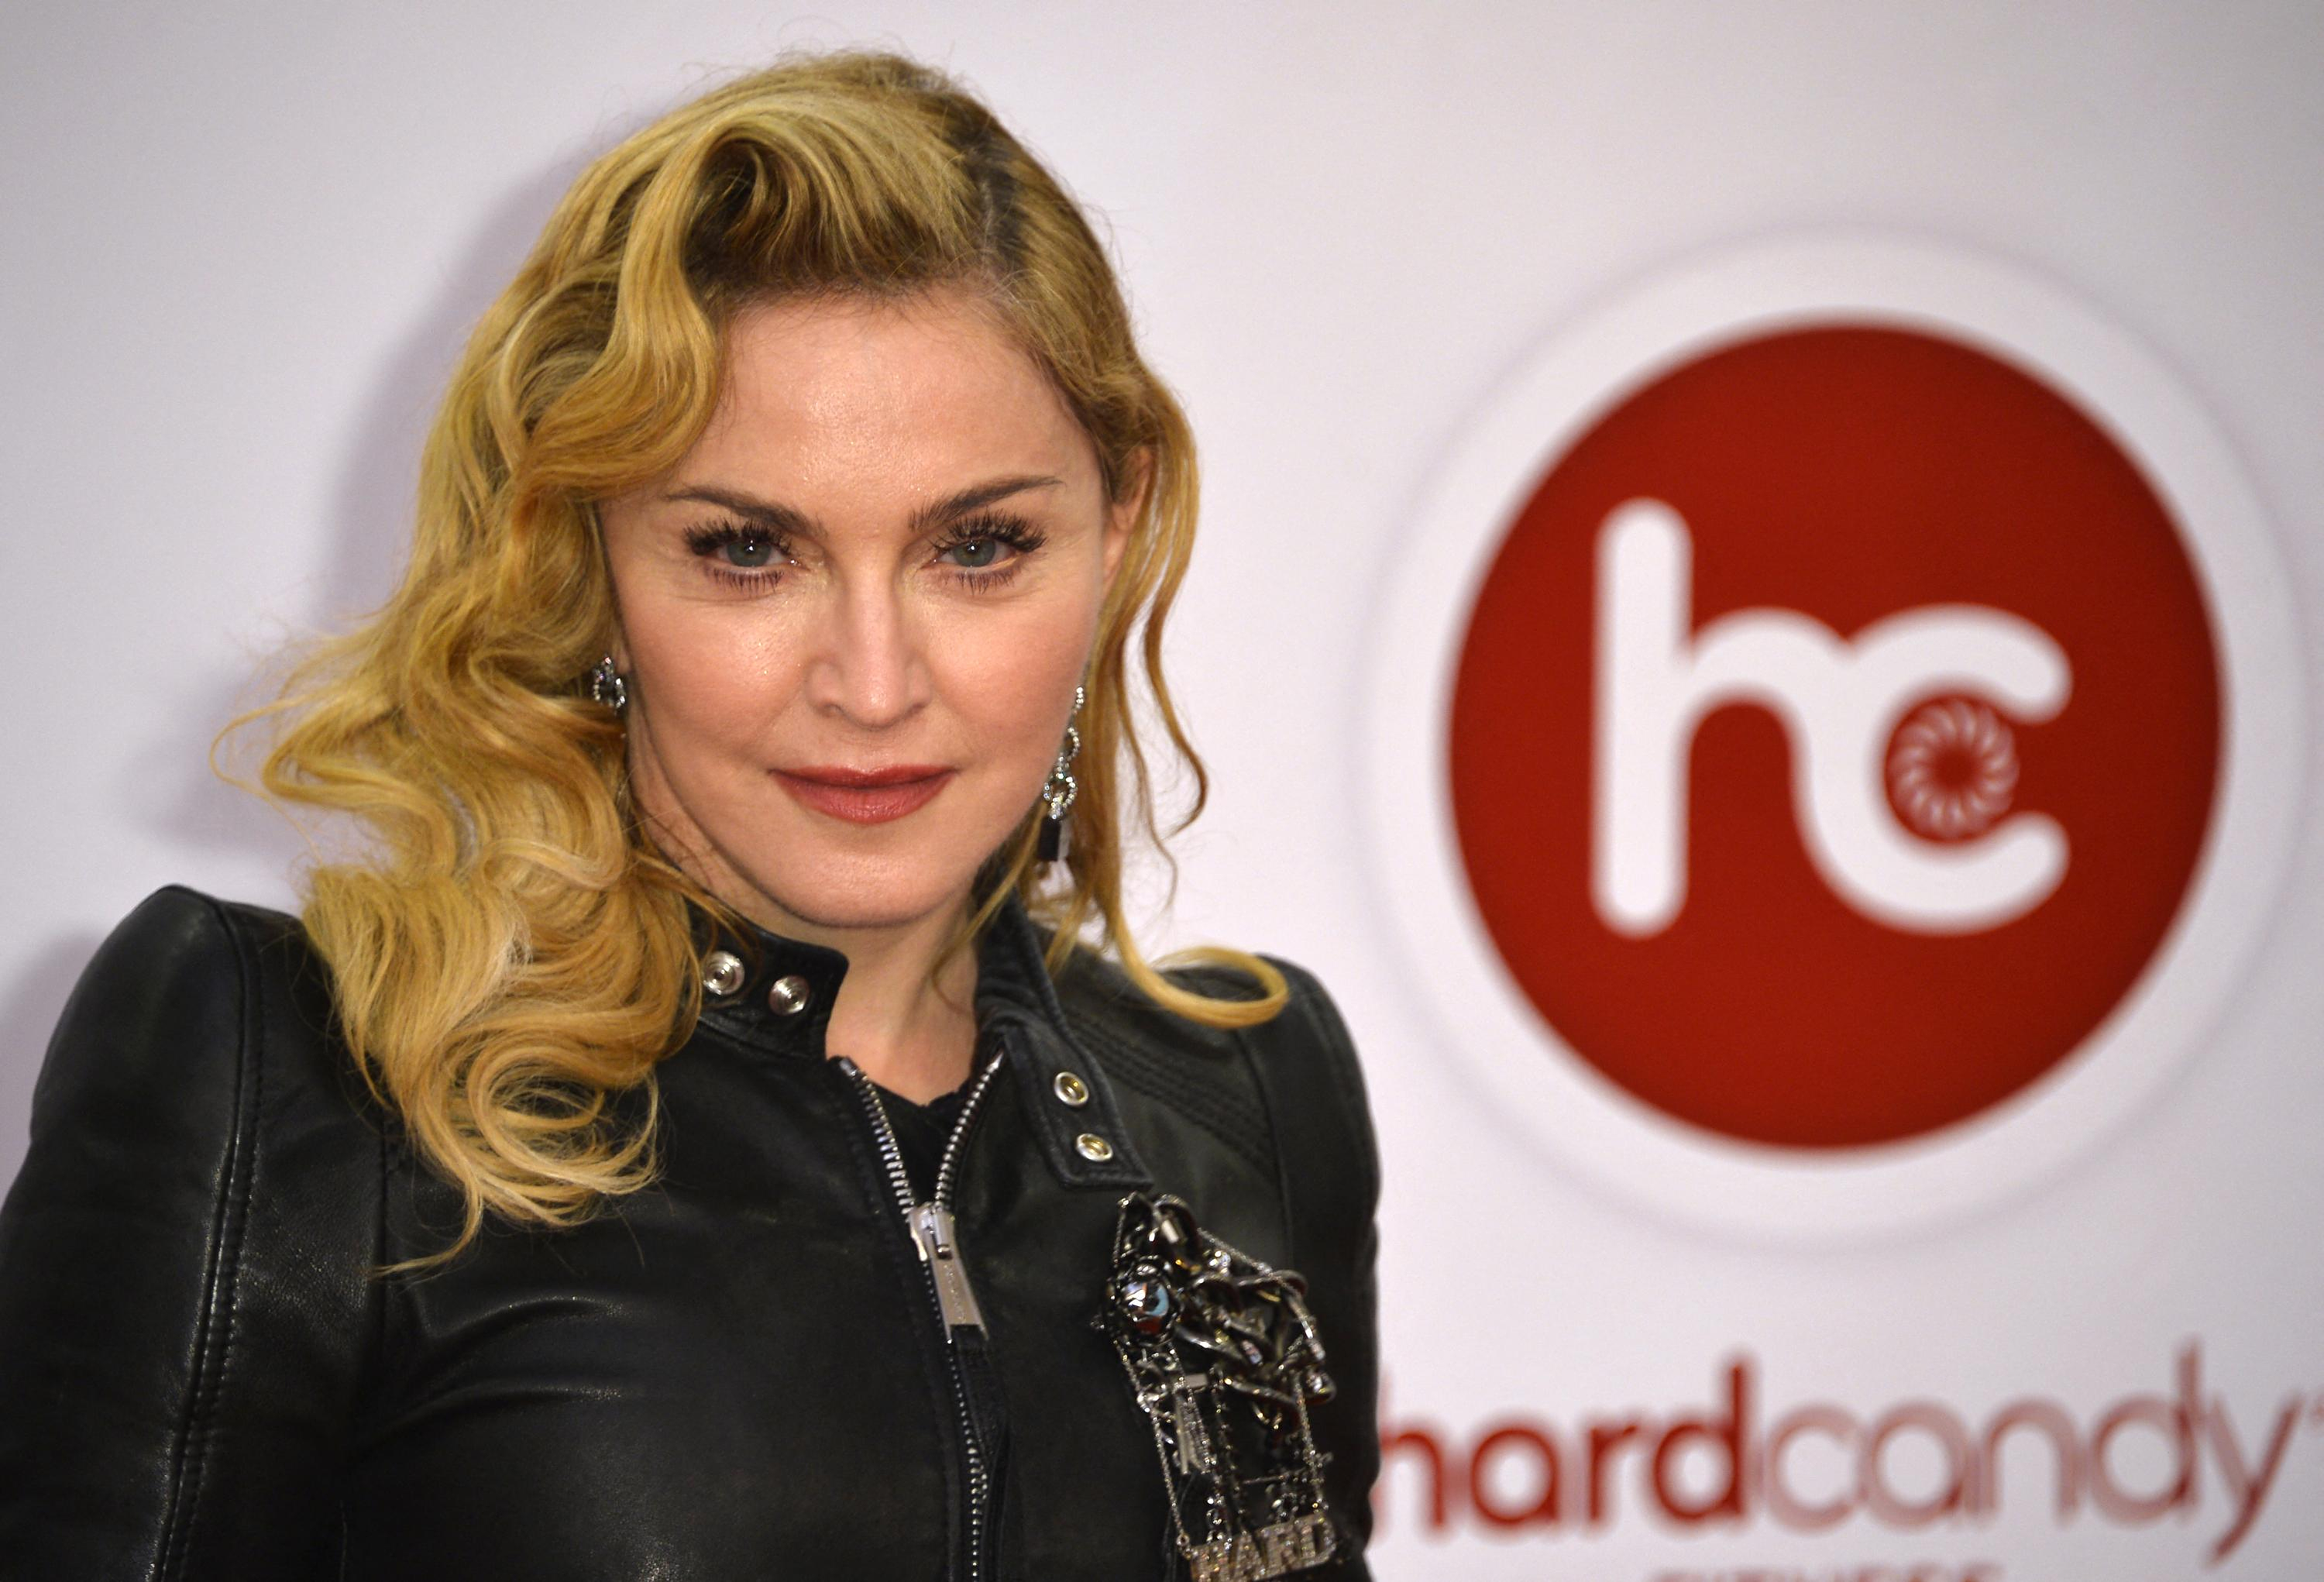 Madonna fans file complaint against star, accused of being late for her concerts